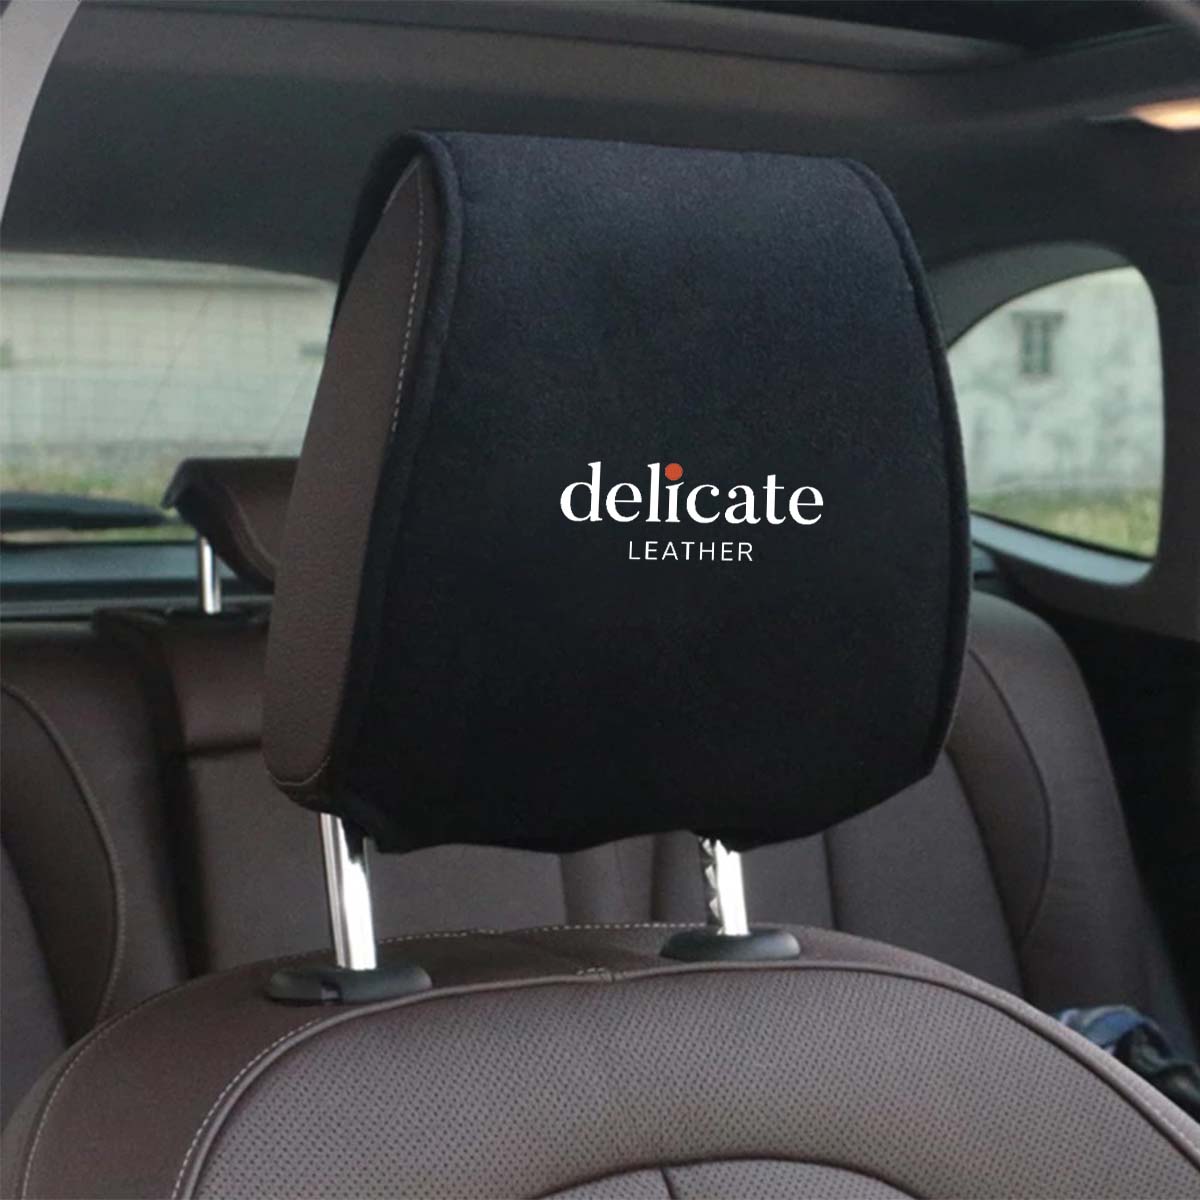 Mercedes Benz Car Seat Headrest Cover: Stylish Protection for Your Vehicle's Headrests